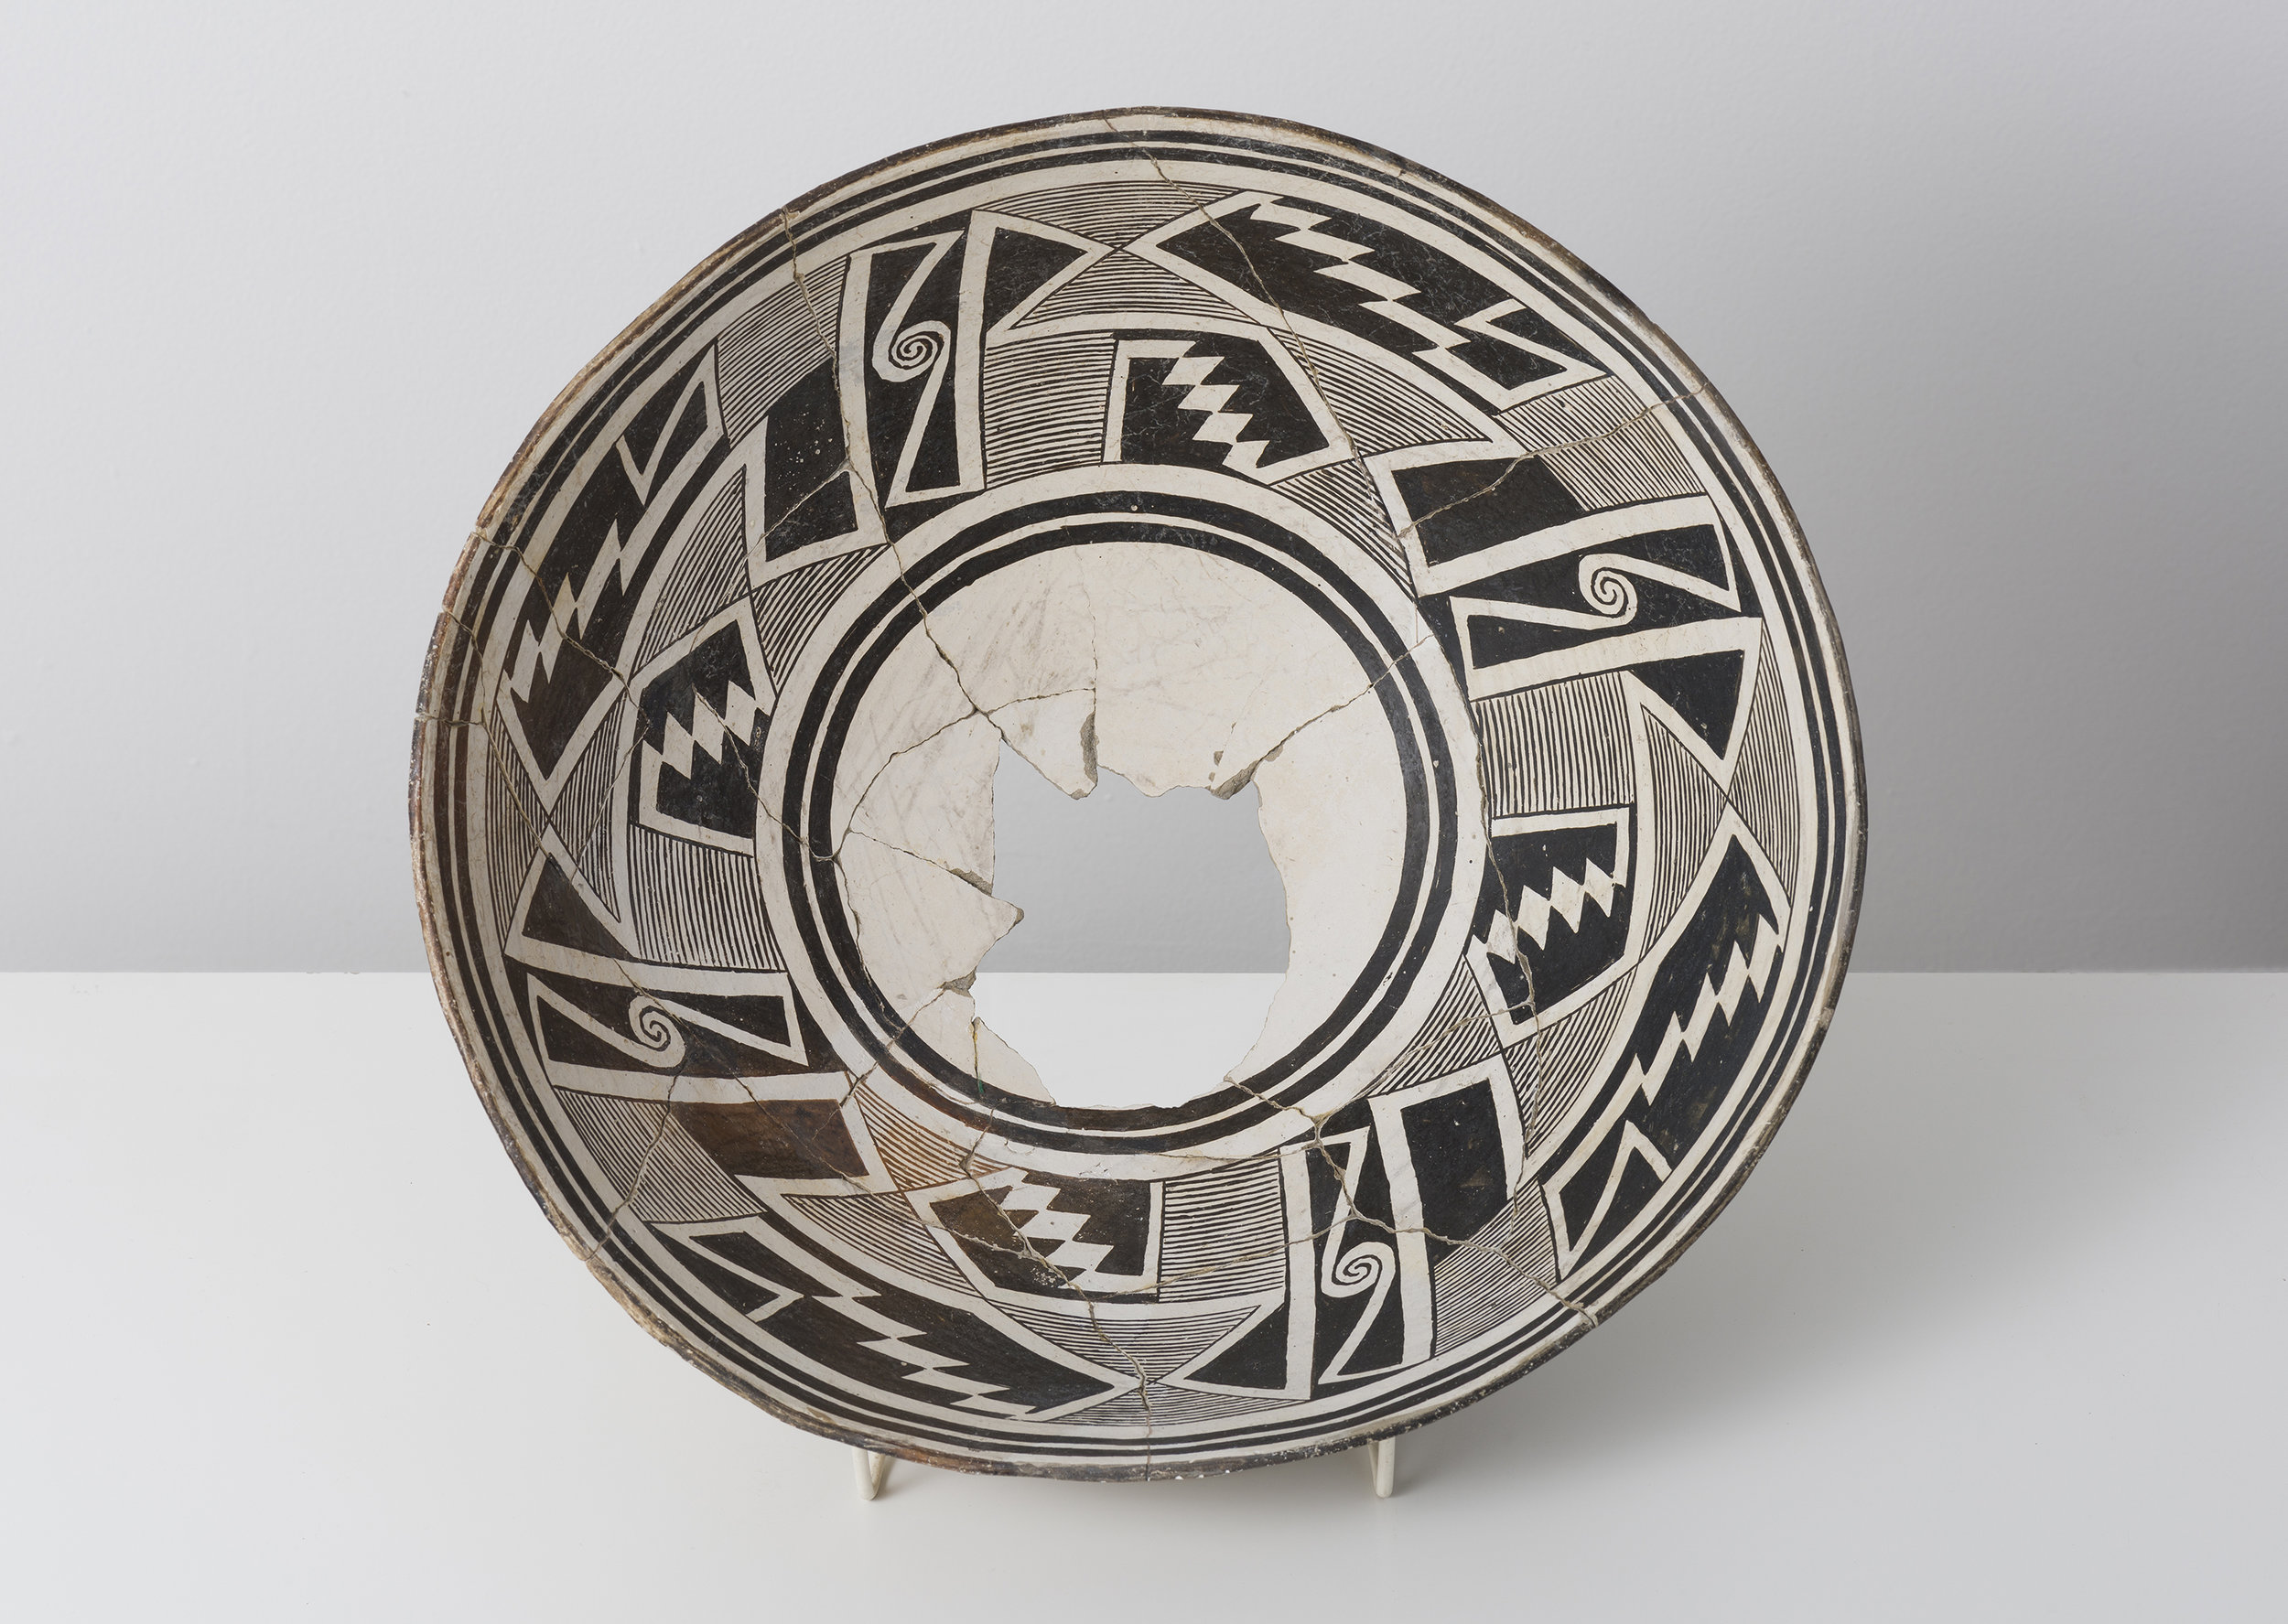   Classic Mimbres Black-on-white  Abstracted datura buds with entoptic patterns c. 900 - 1000 CE Painted ceramic 13 inches diameter, 4 inches depth    